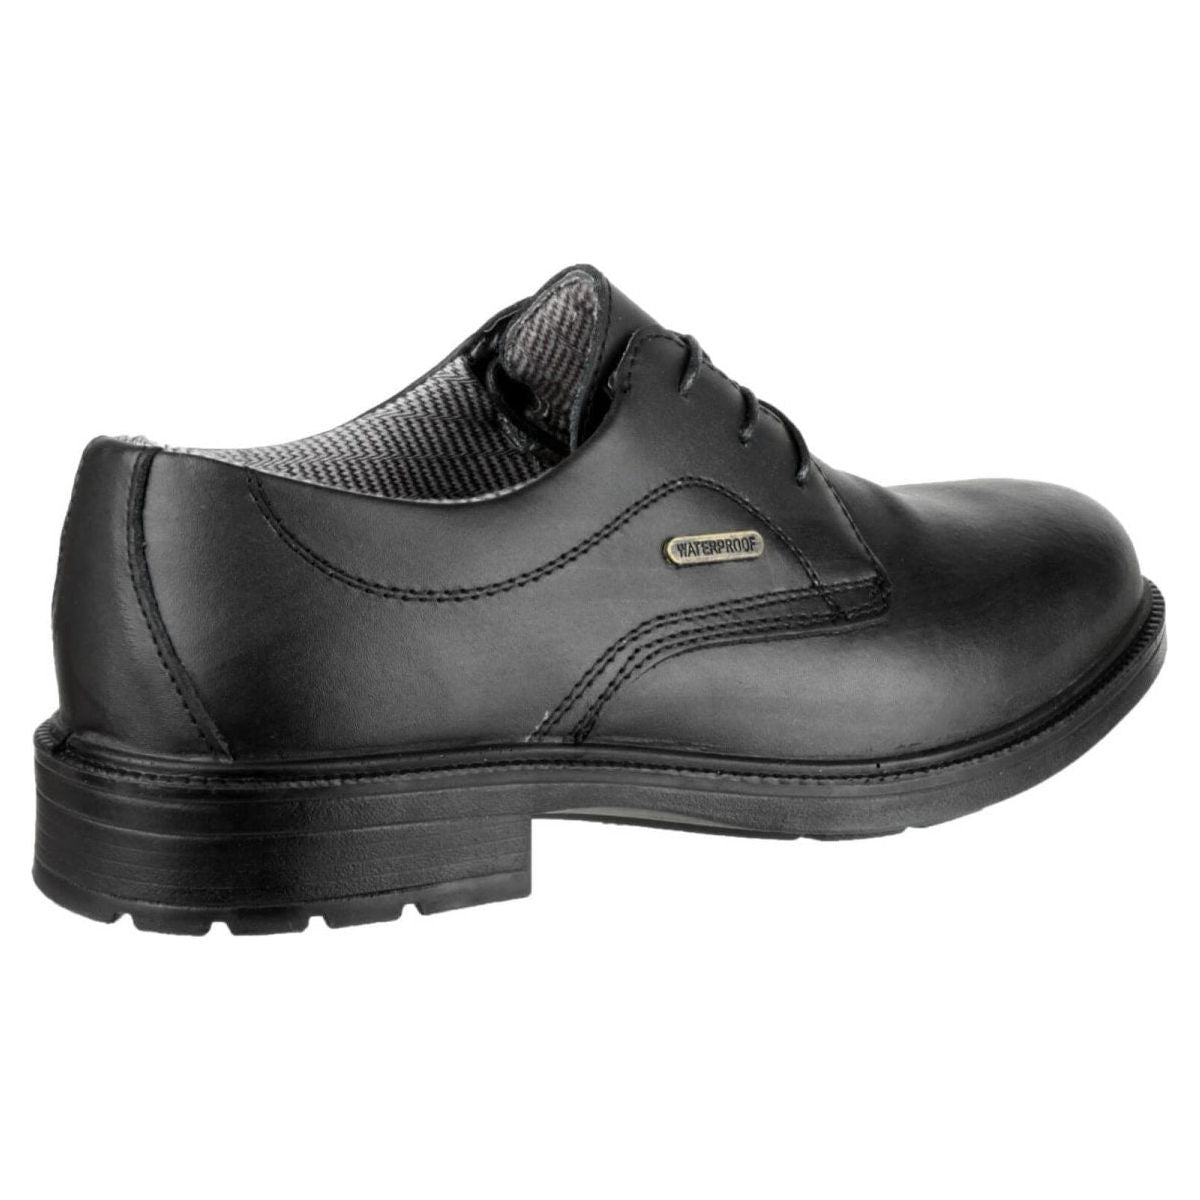 Amblers Fs62 Waterproof Gibson Safety Shoes Mens - workweargurus.com